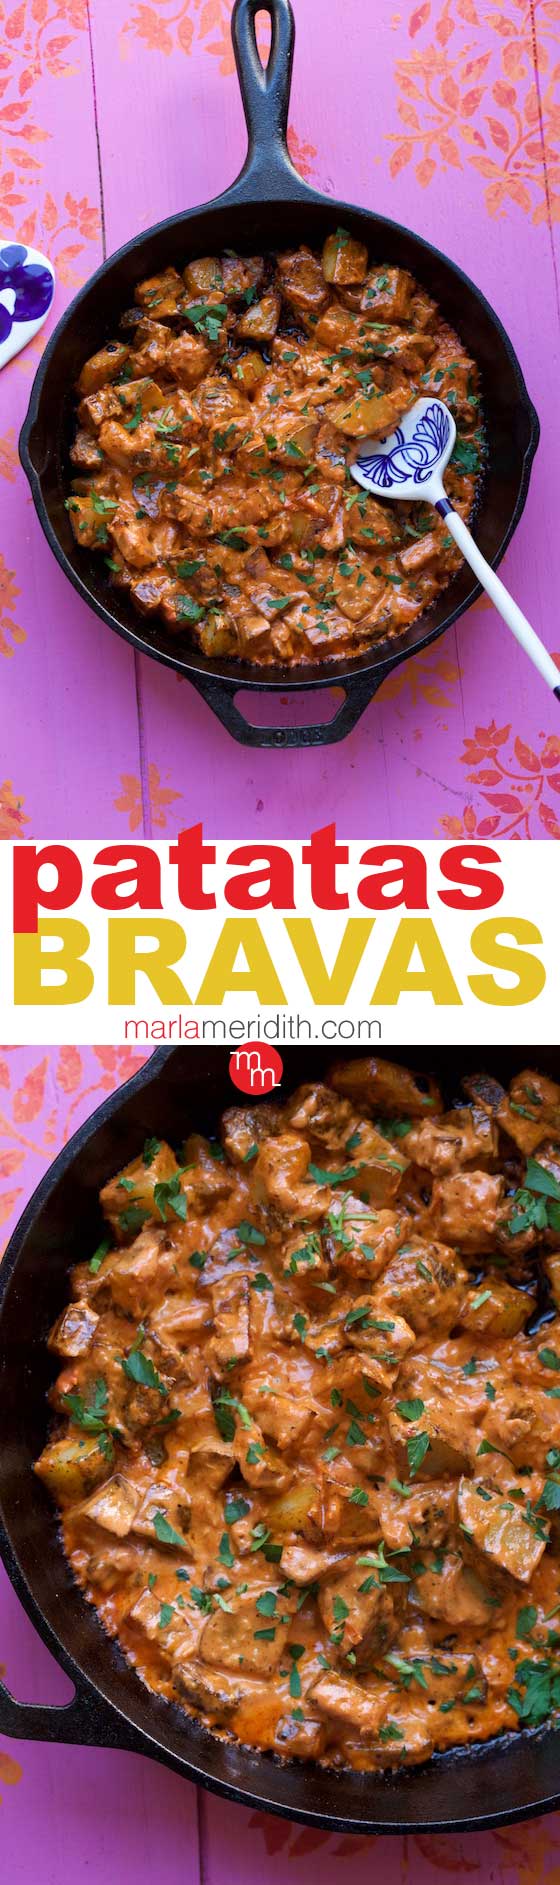 Patatas Bravas: This Spanish bar snack is one of the best things I've ever eaten! #recipe MarlaMeridith.com #potato